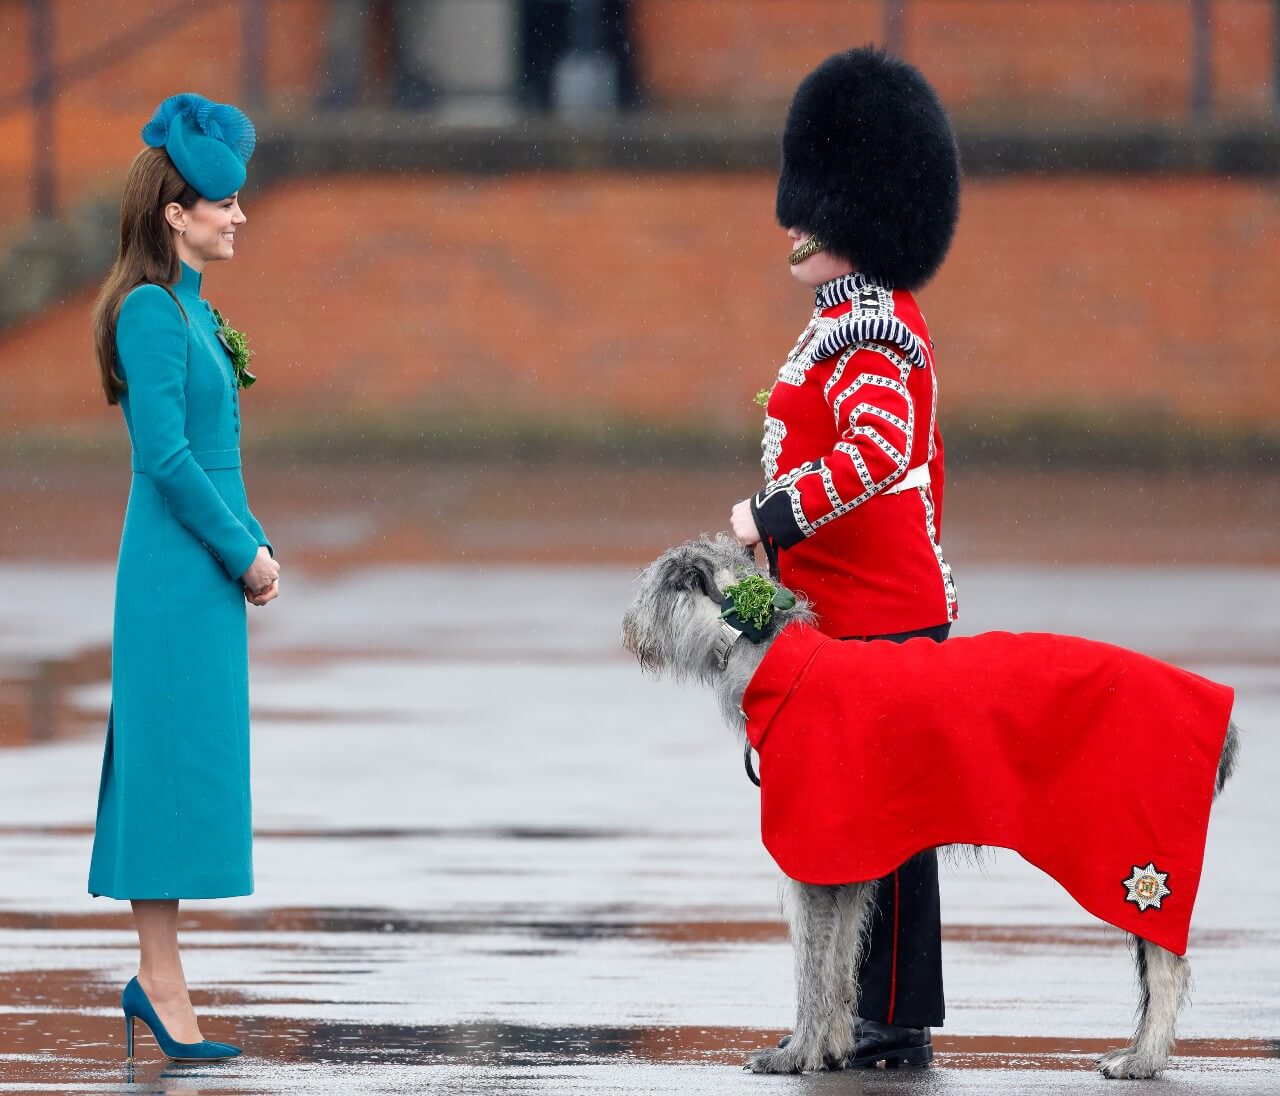 Kate Middleton celebrates St. Patrick's Day 2023 in her teal coat and shoes.